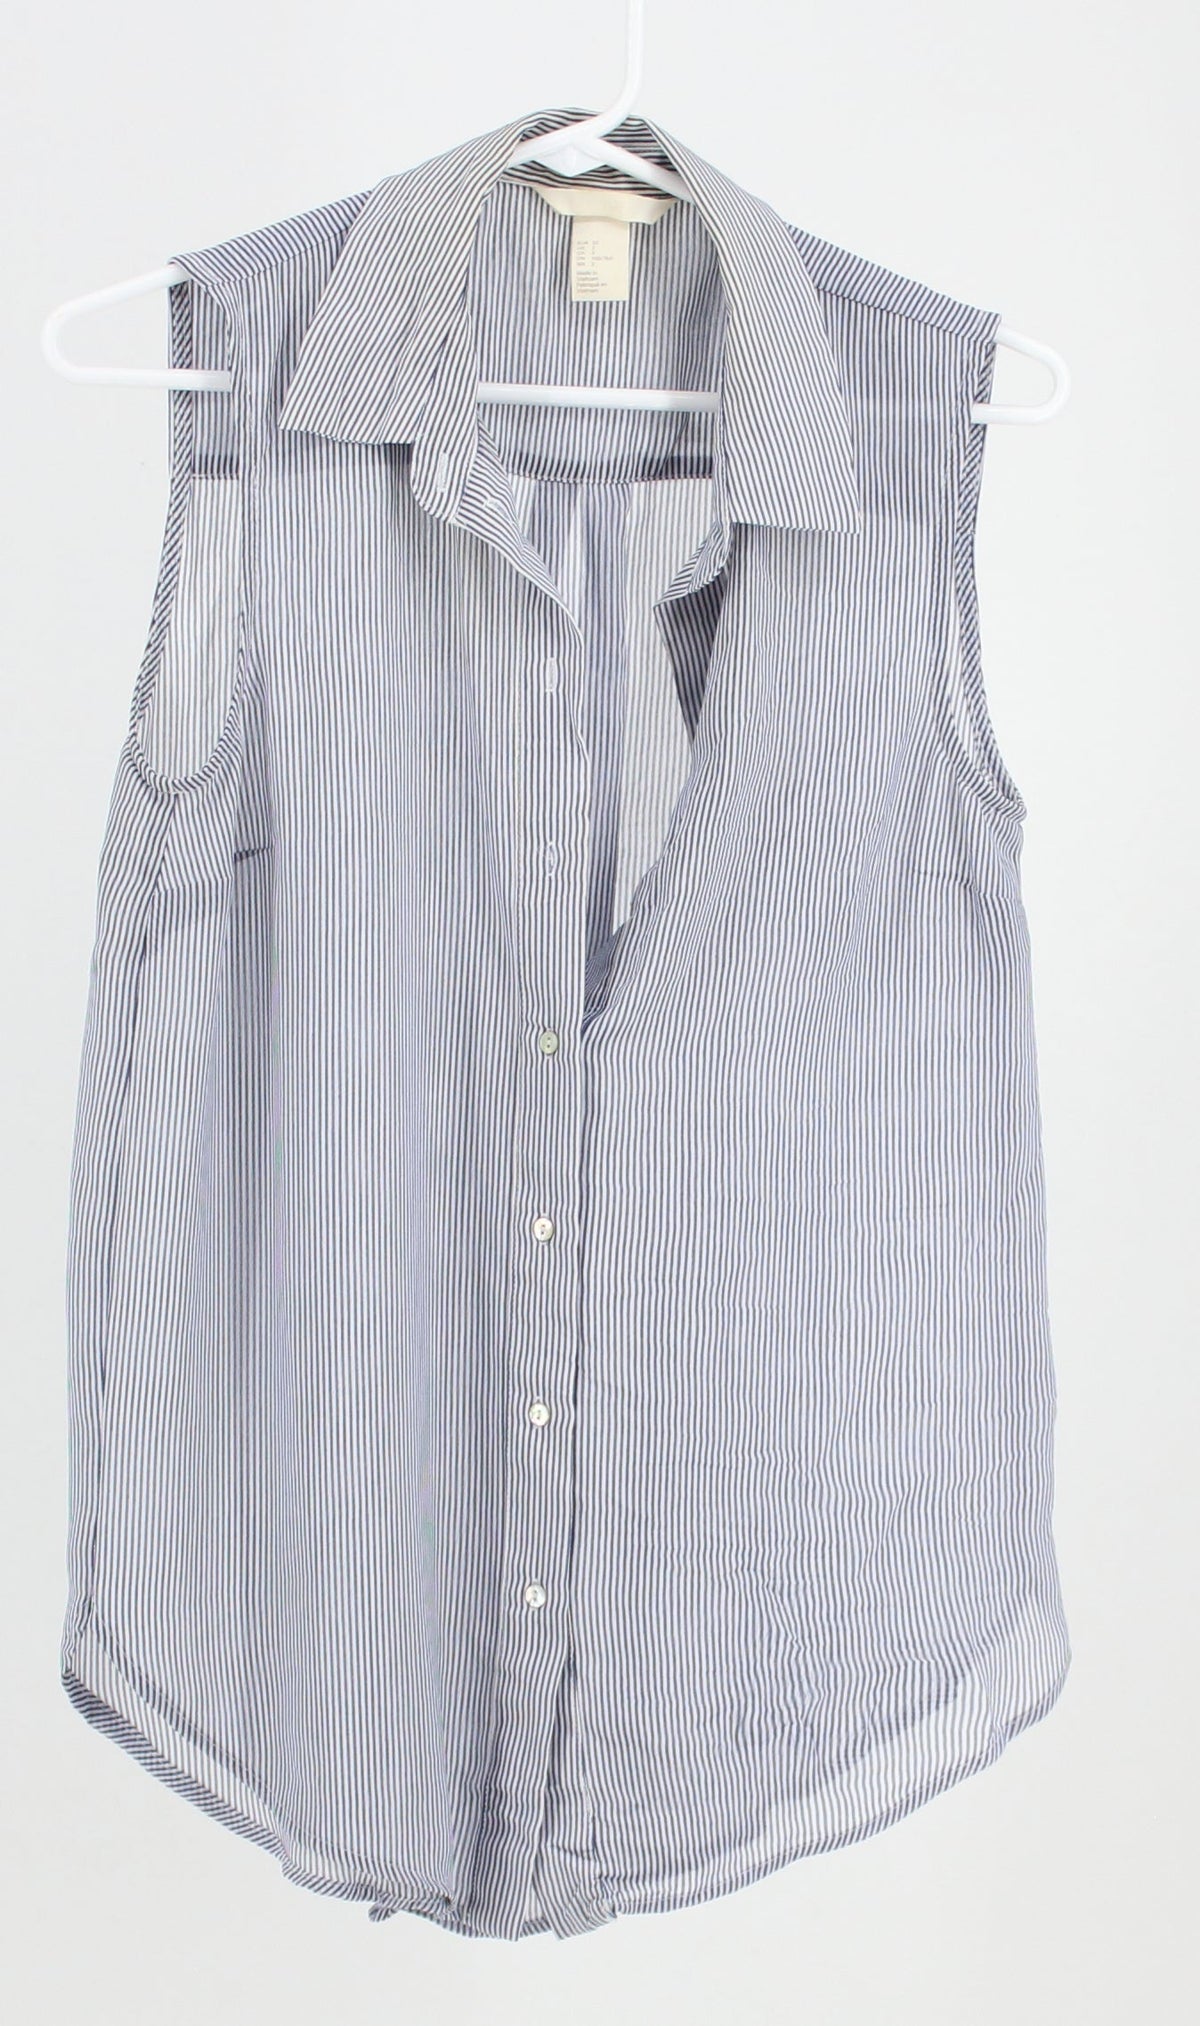 H&M collared blue and white striped sleeveless button up top